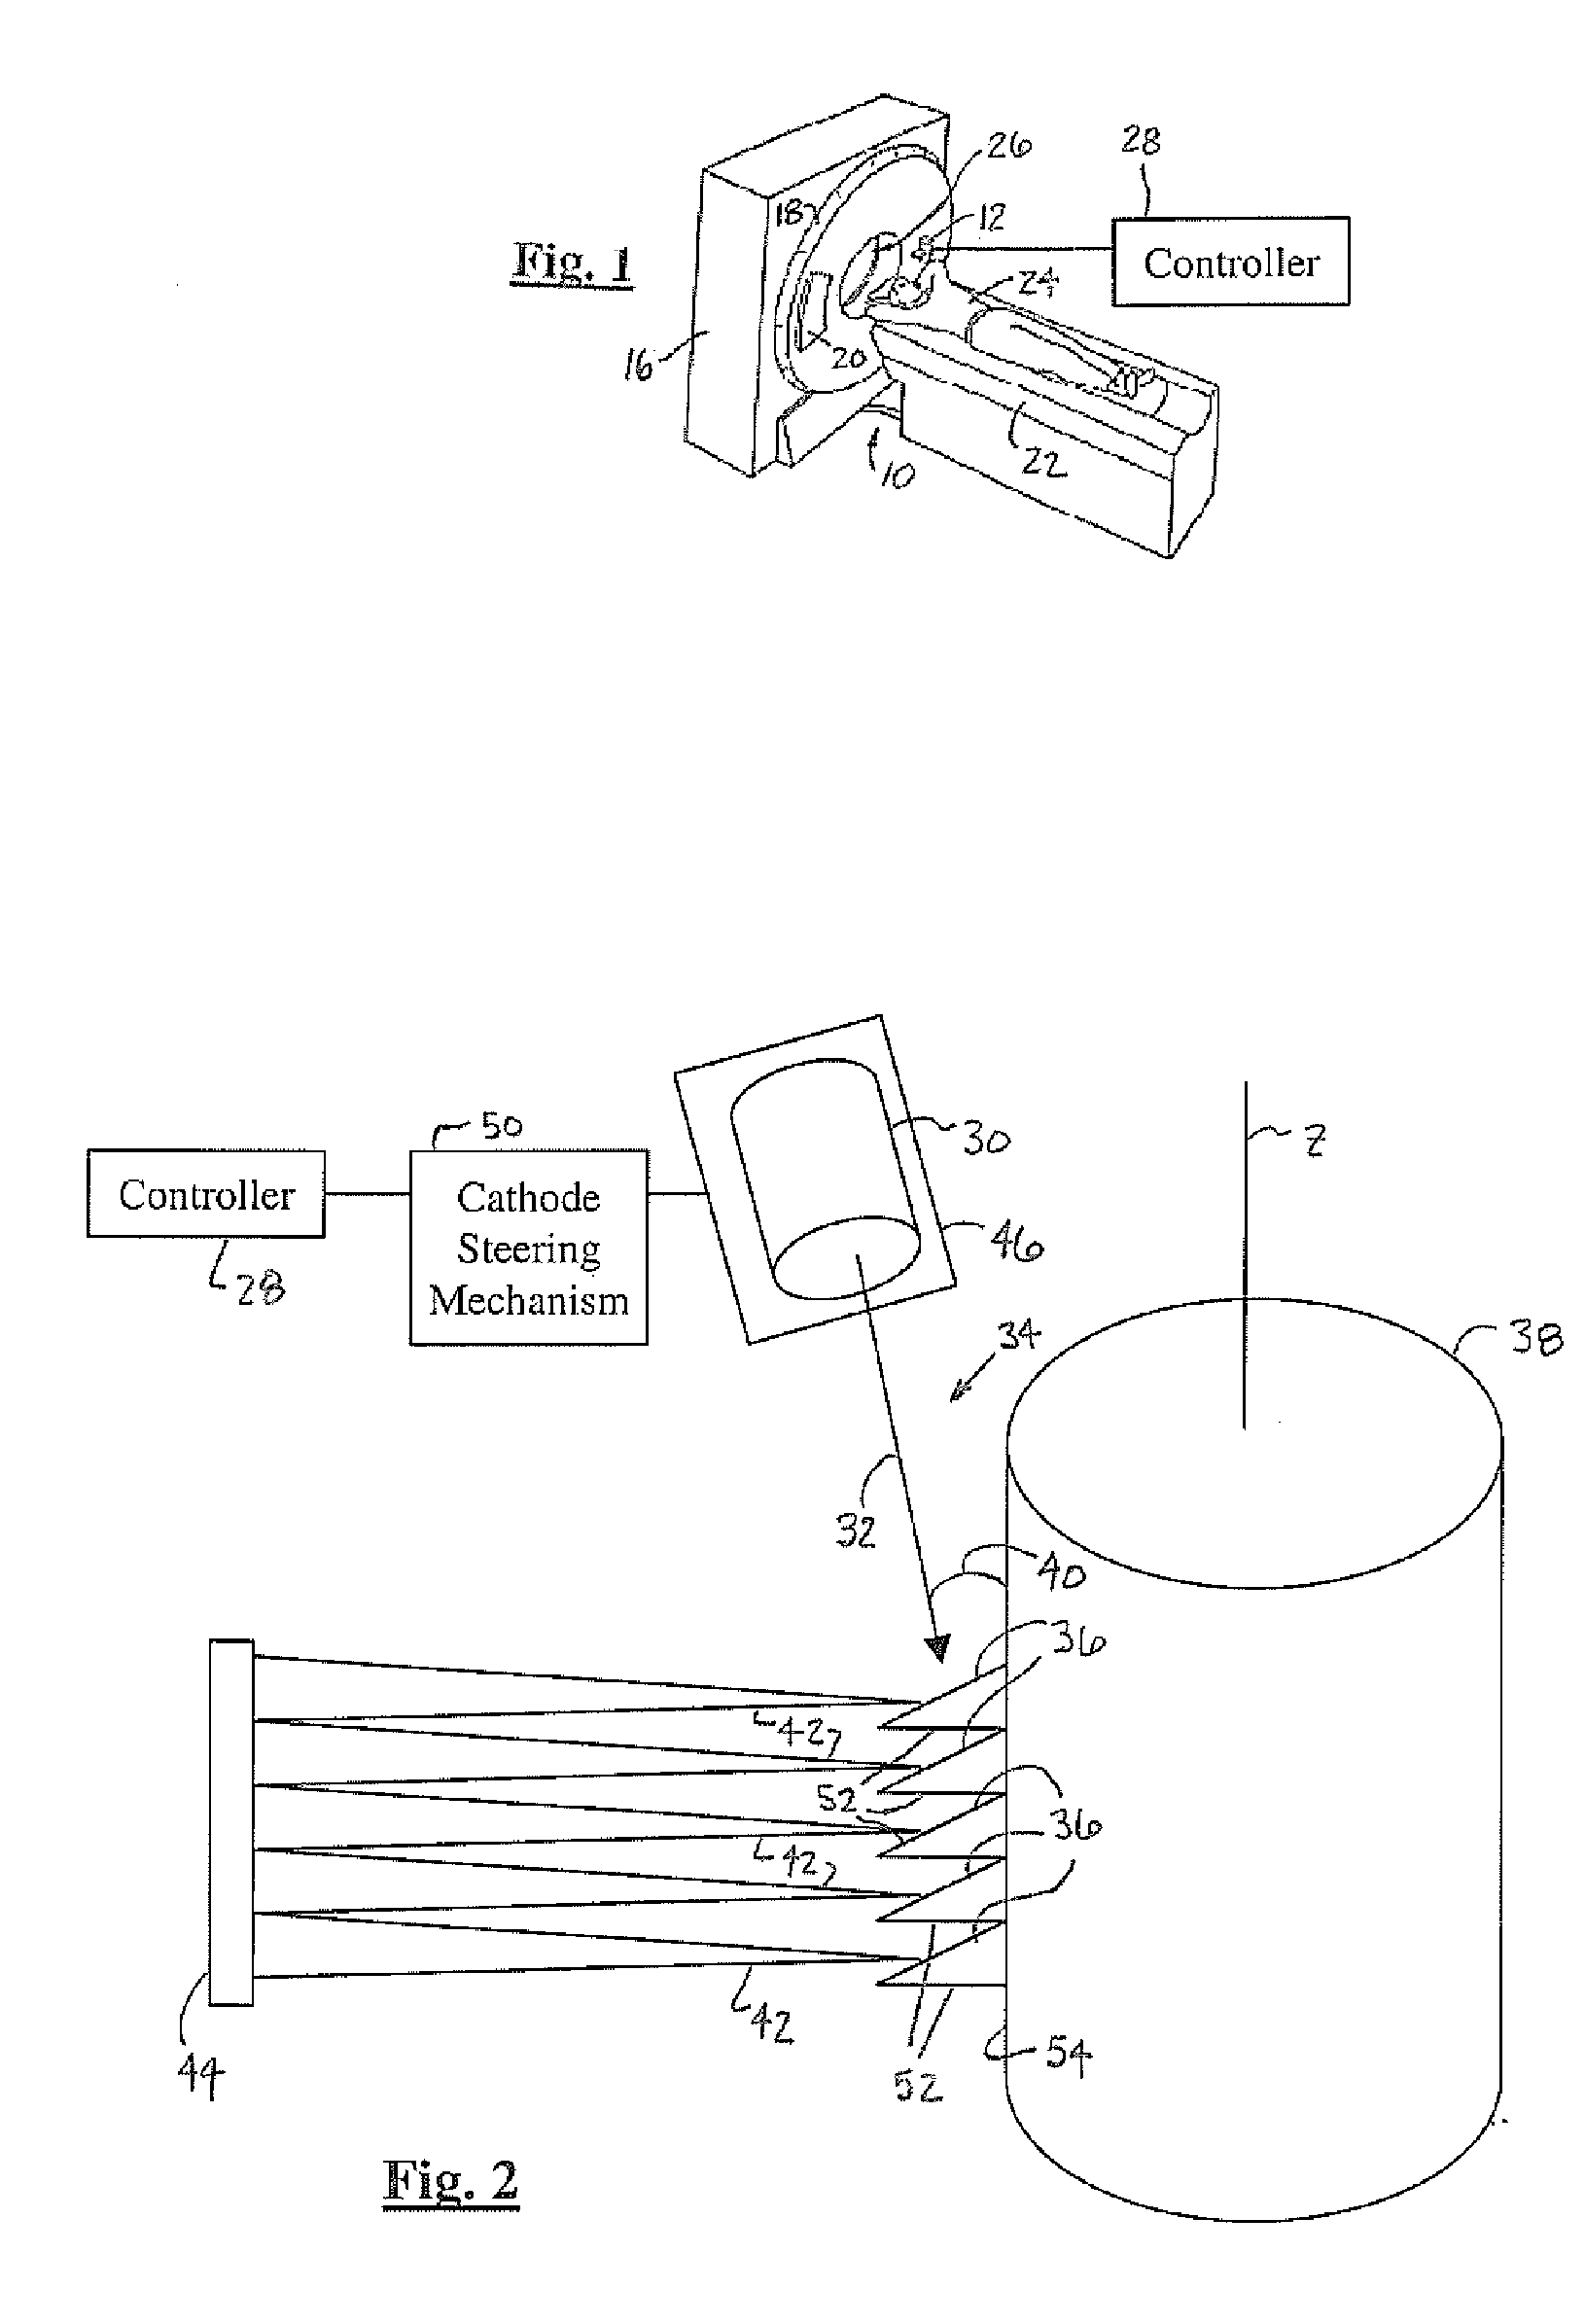 Wide scanning x-ray source